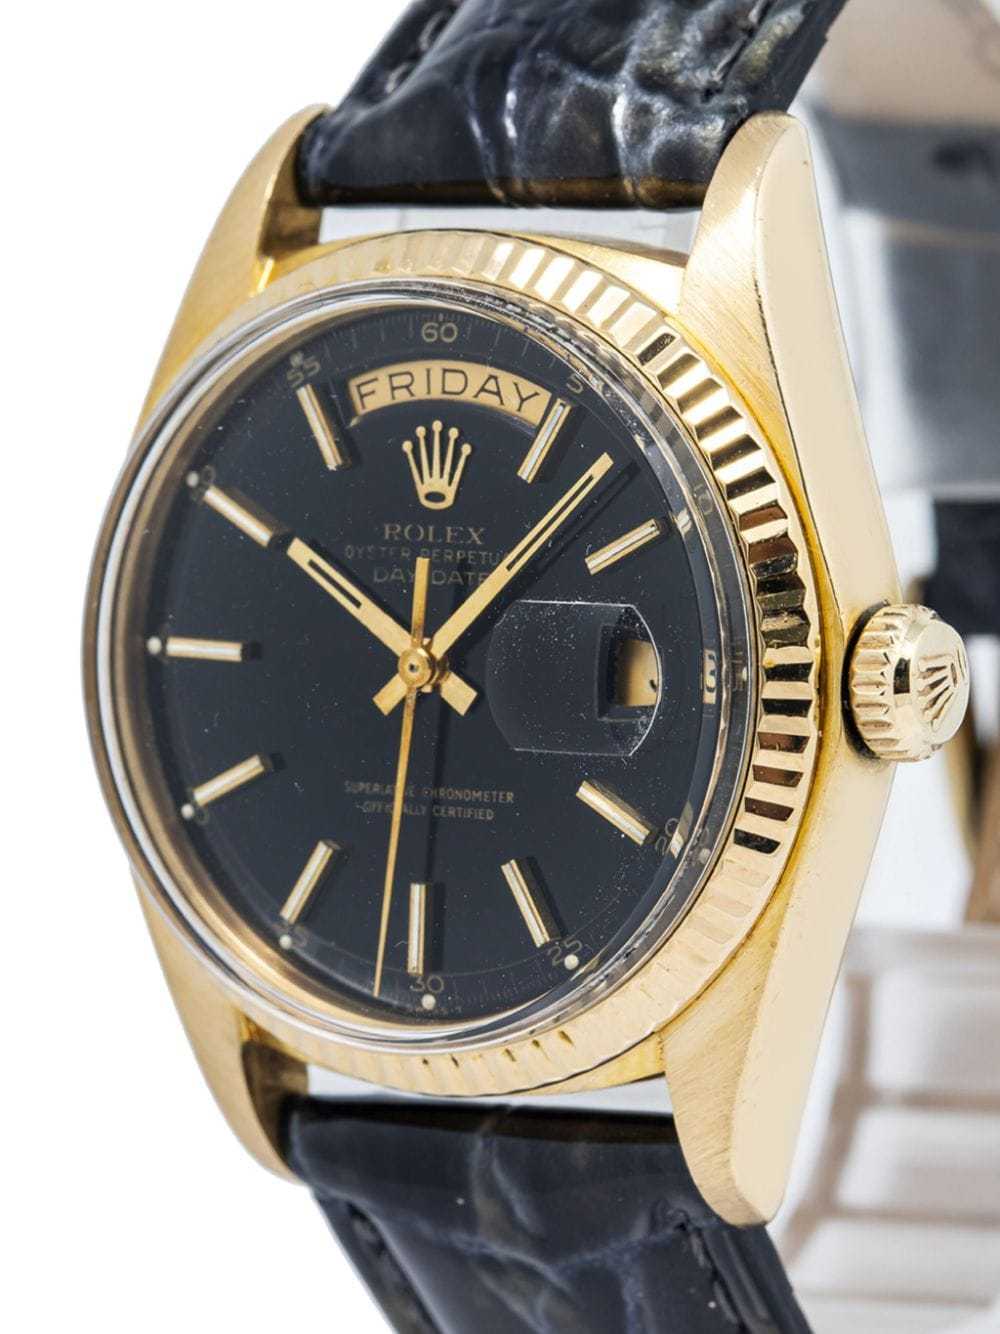 Rolex pre-owned Day-Date 36mm - Black - image 3